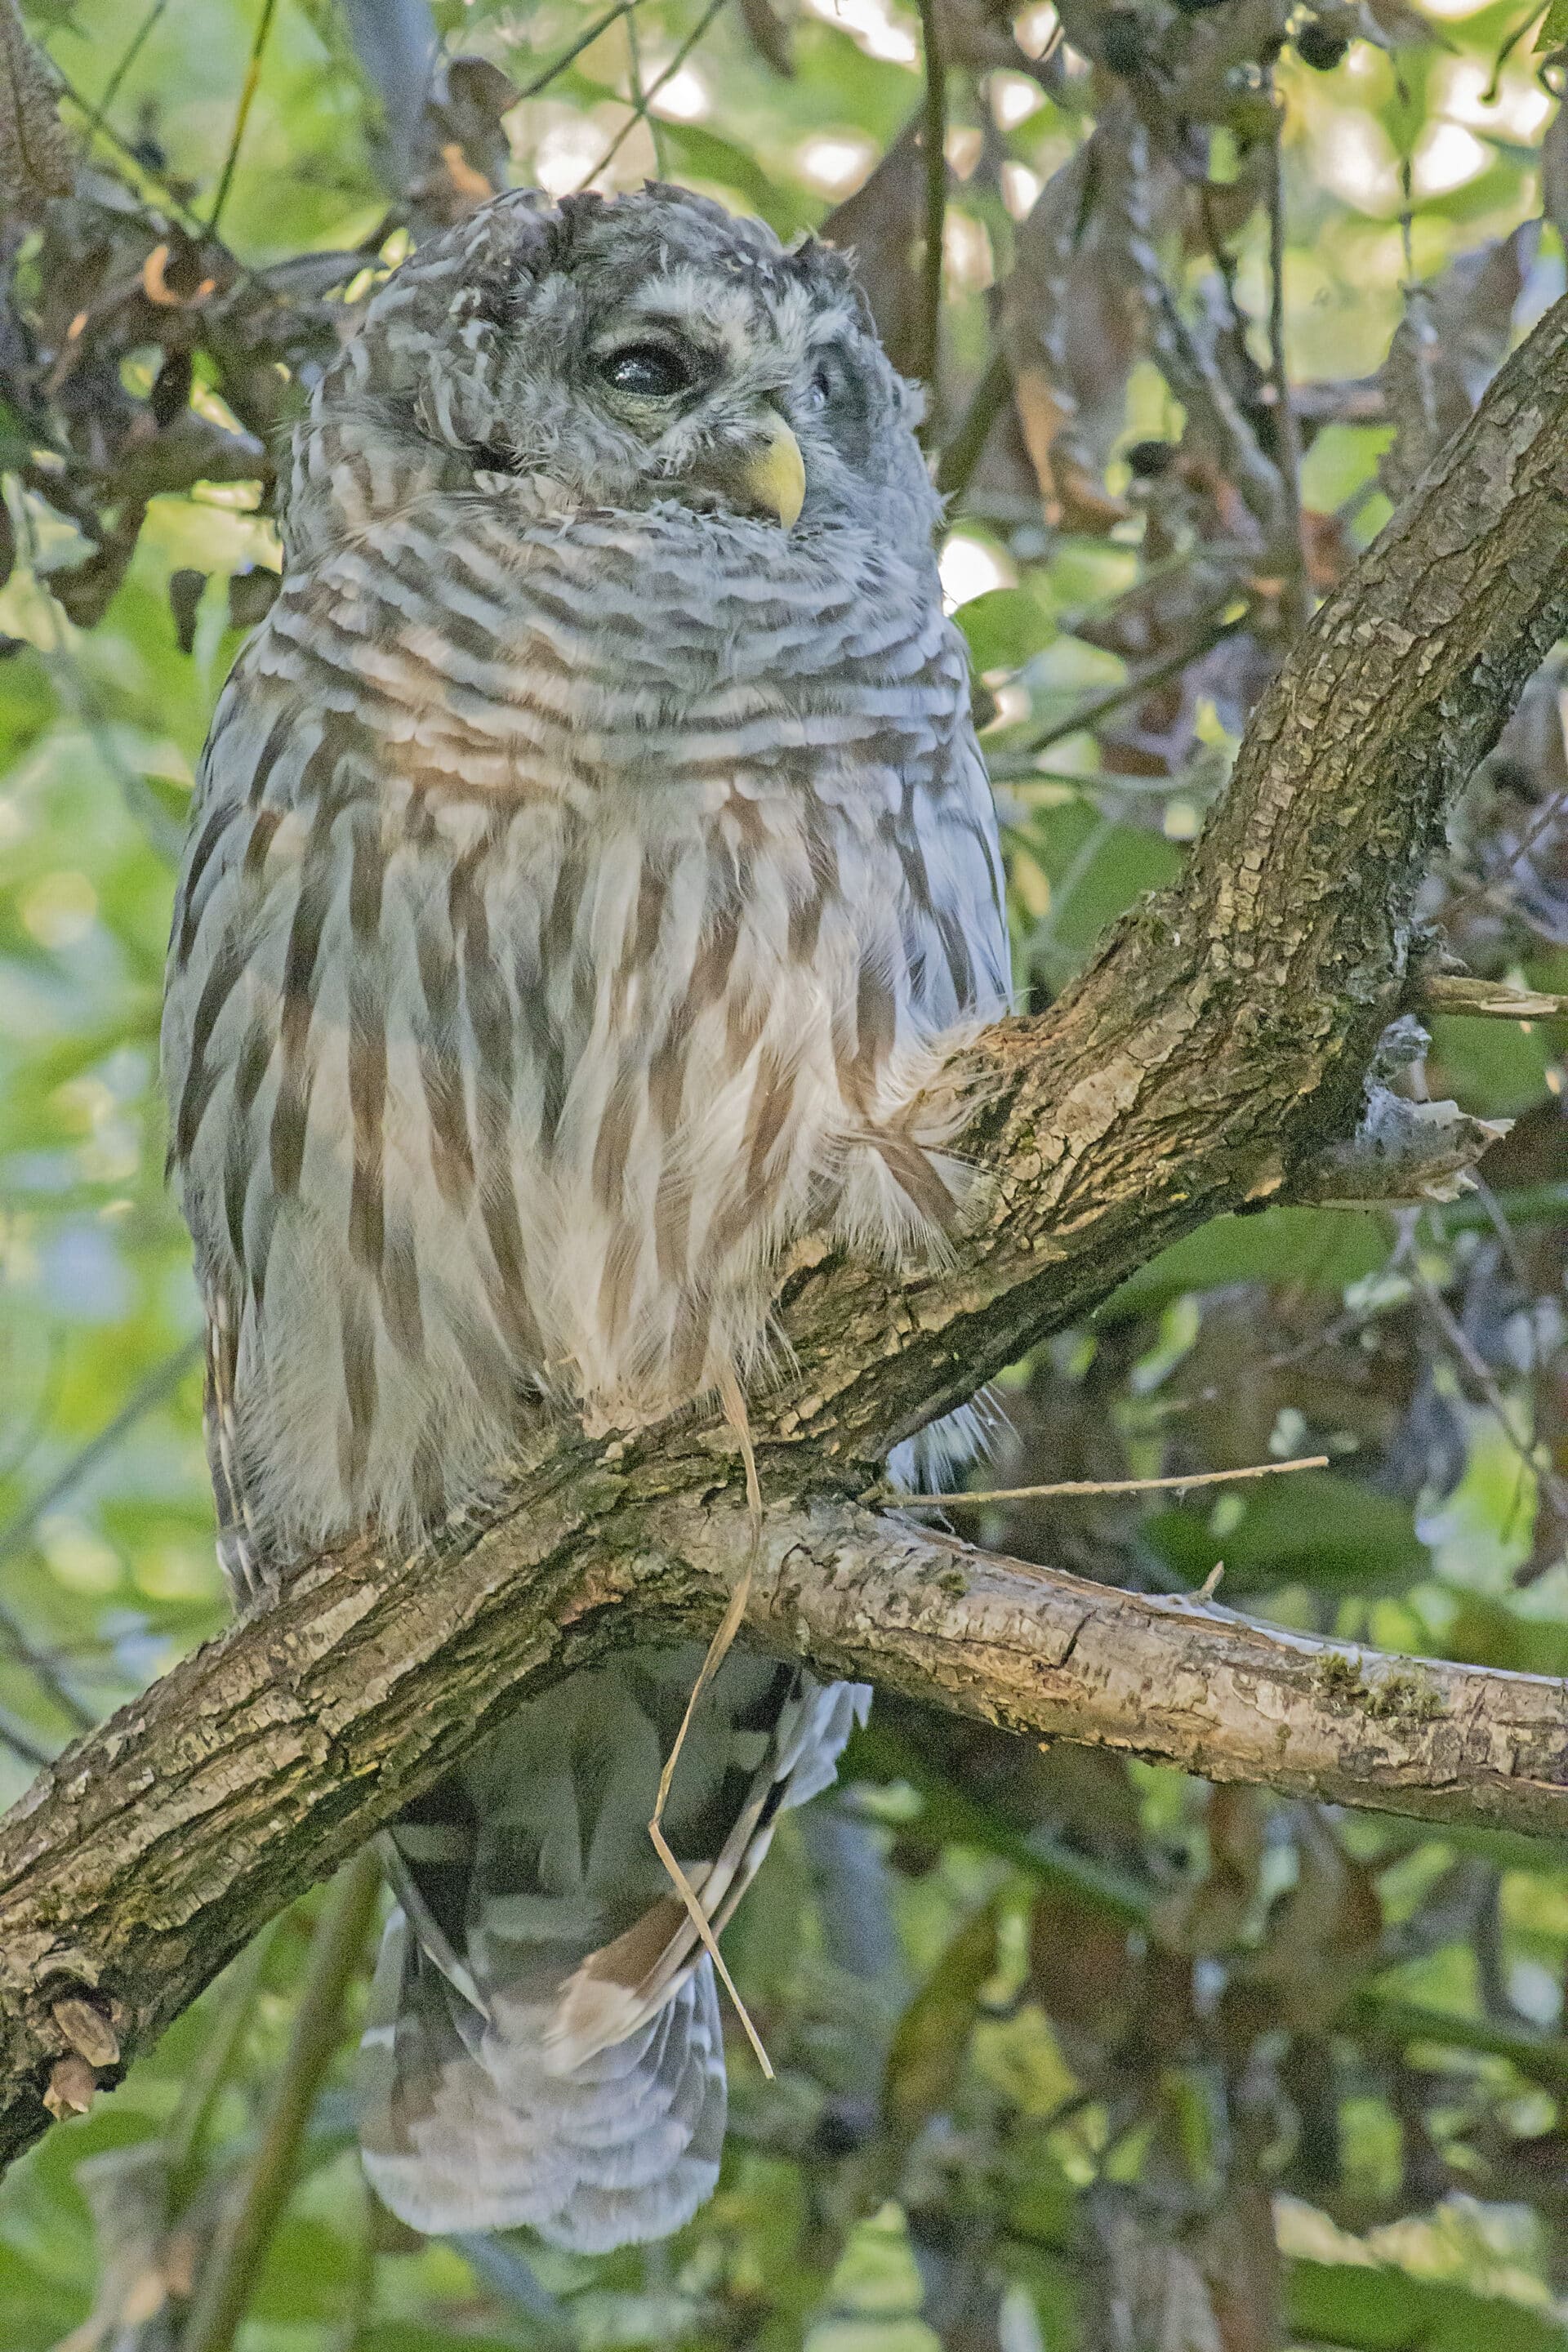 Barred Owl, August 23, 2021